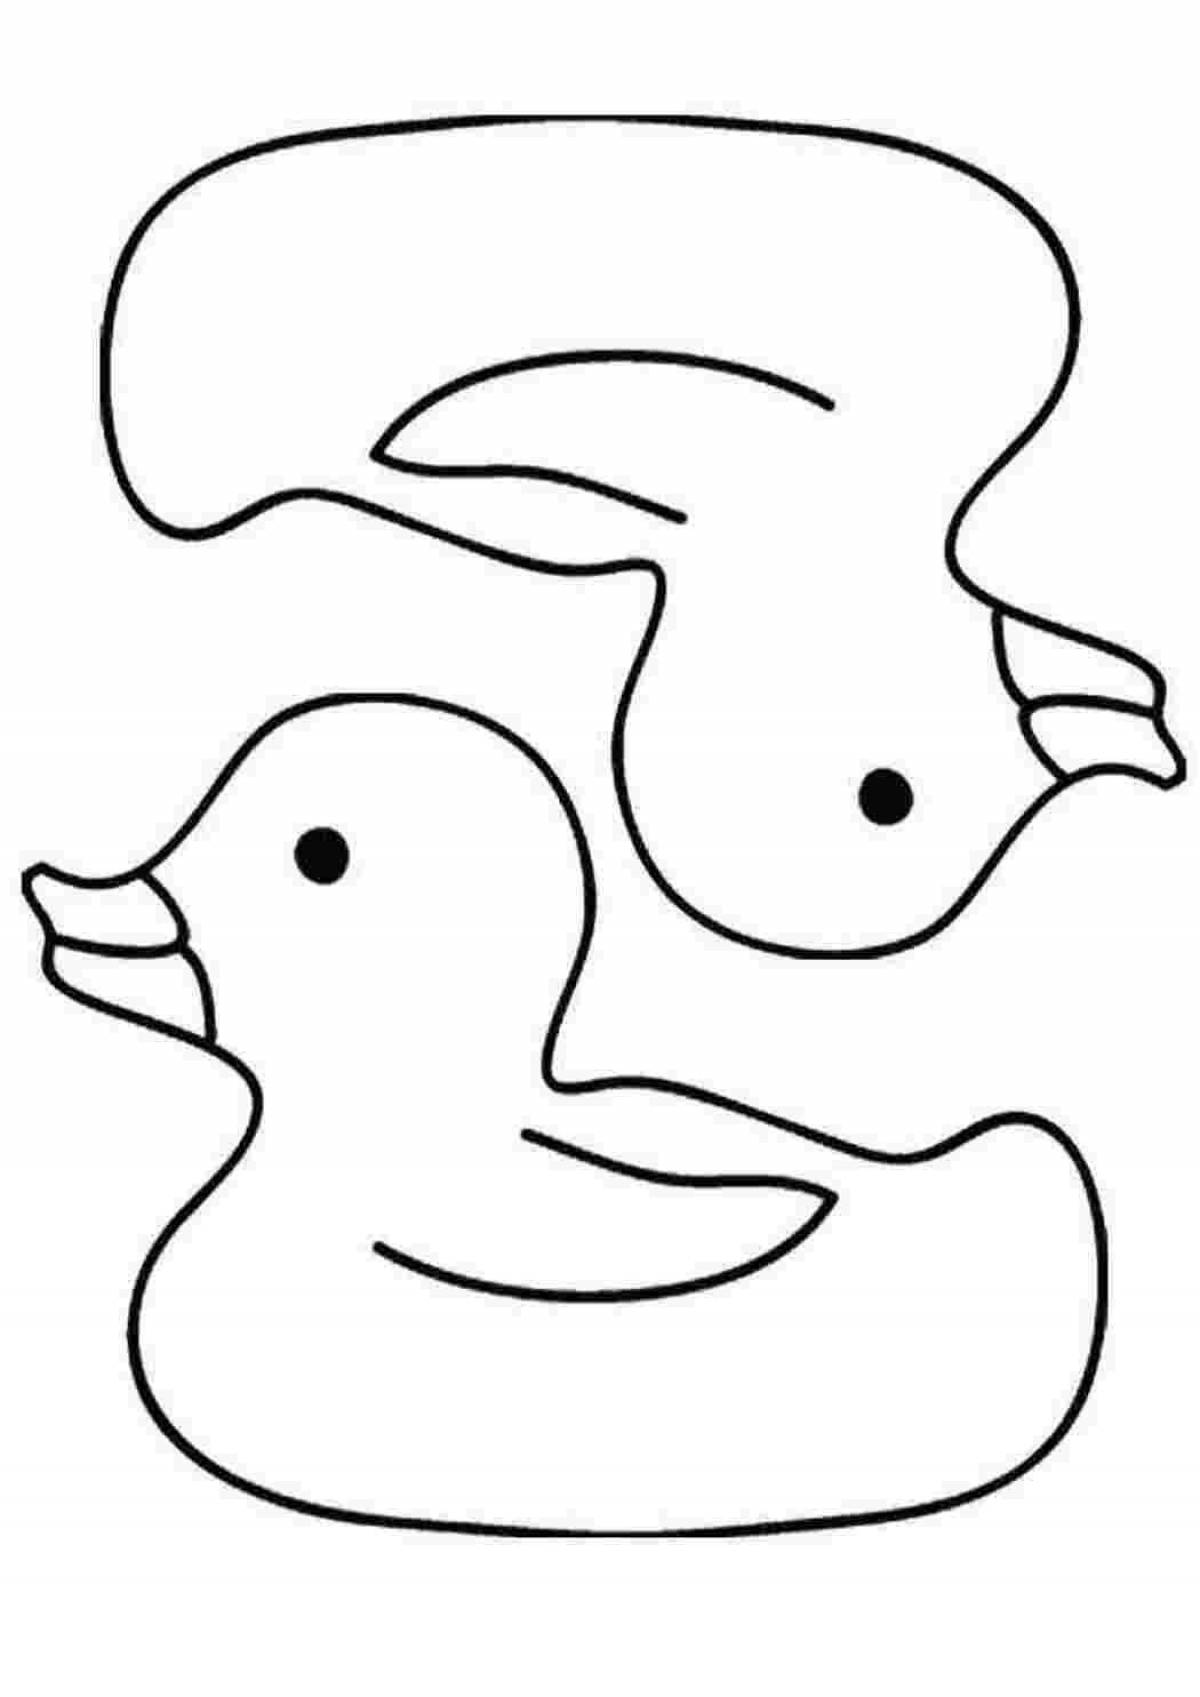 Wonderful duck coloring book for kids